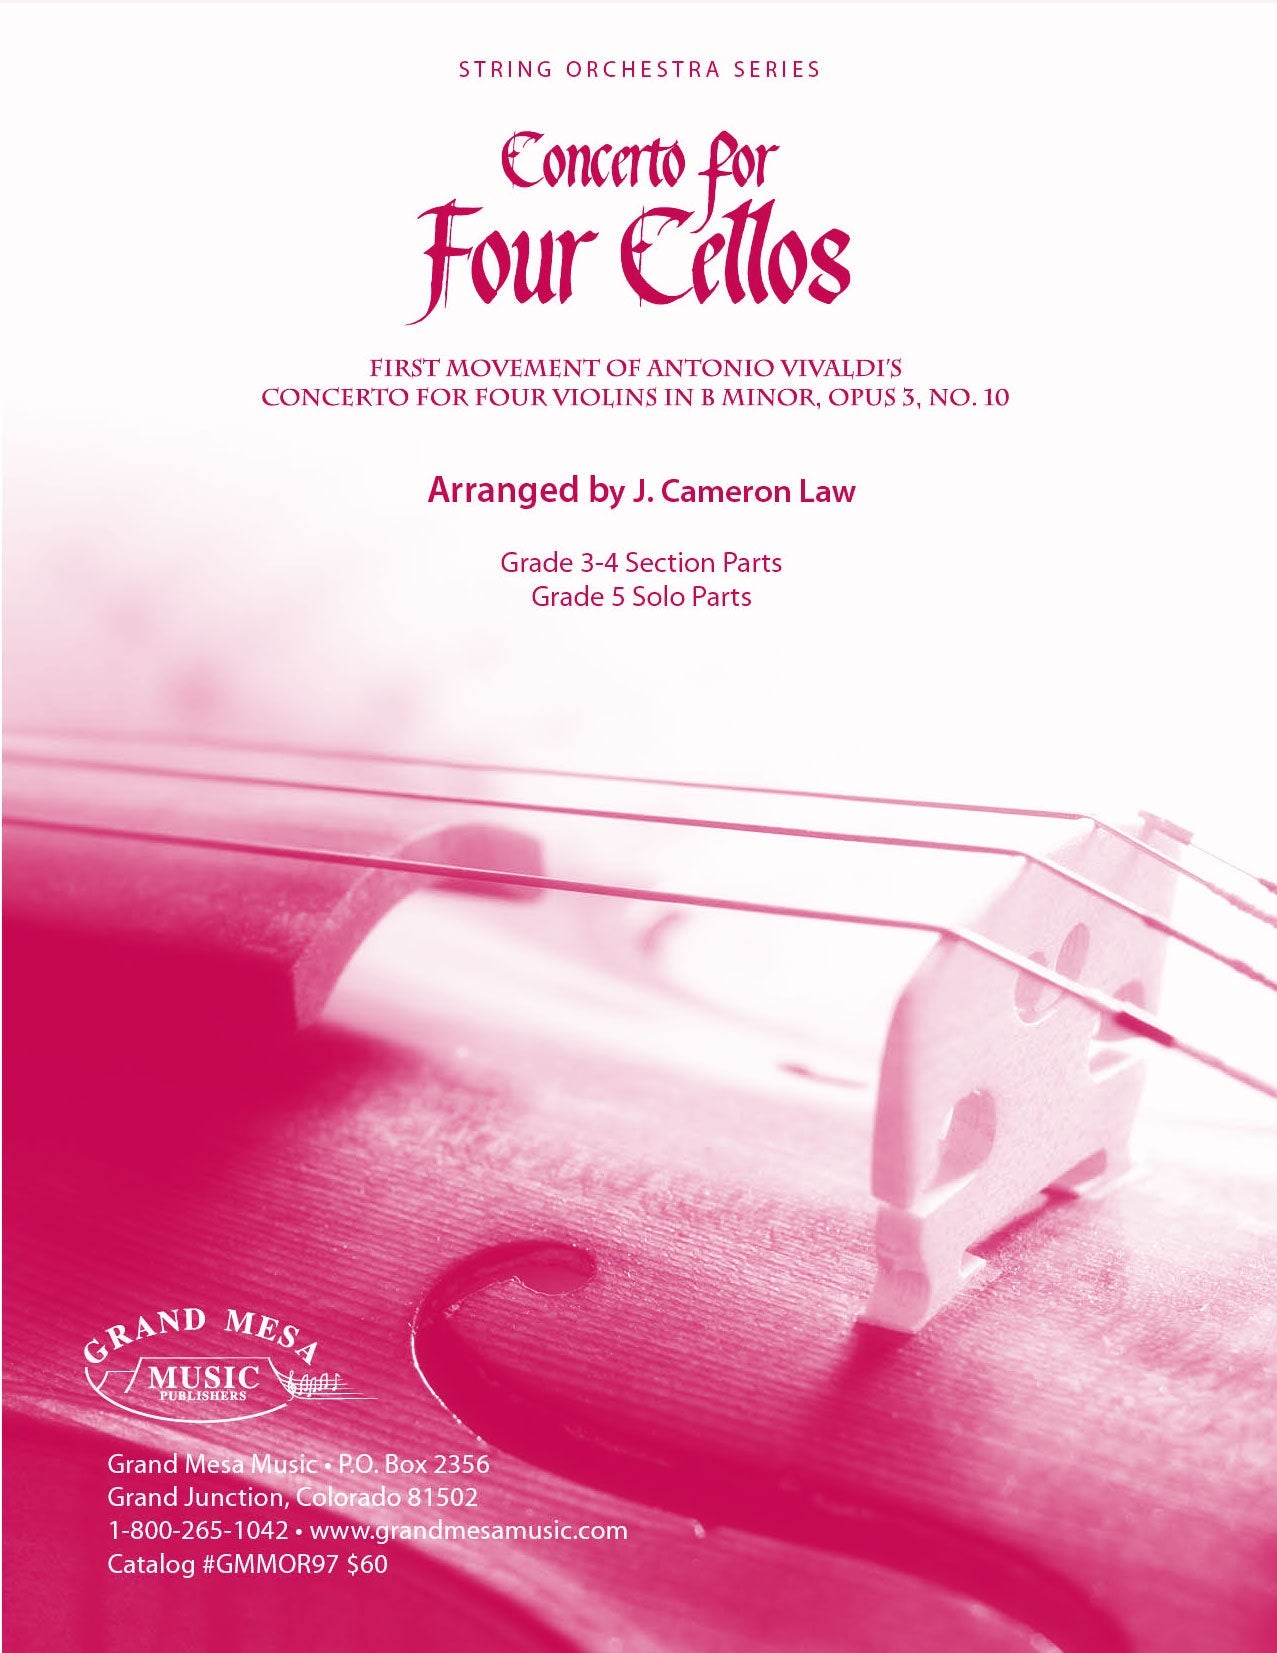 Strings sheet music cover of Concerto for Four Cellos, composed by Antonio Vivaldi, arranged by J. Cameron Law.